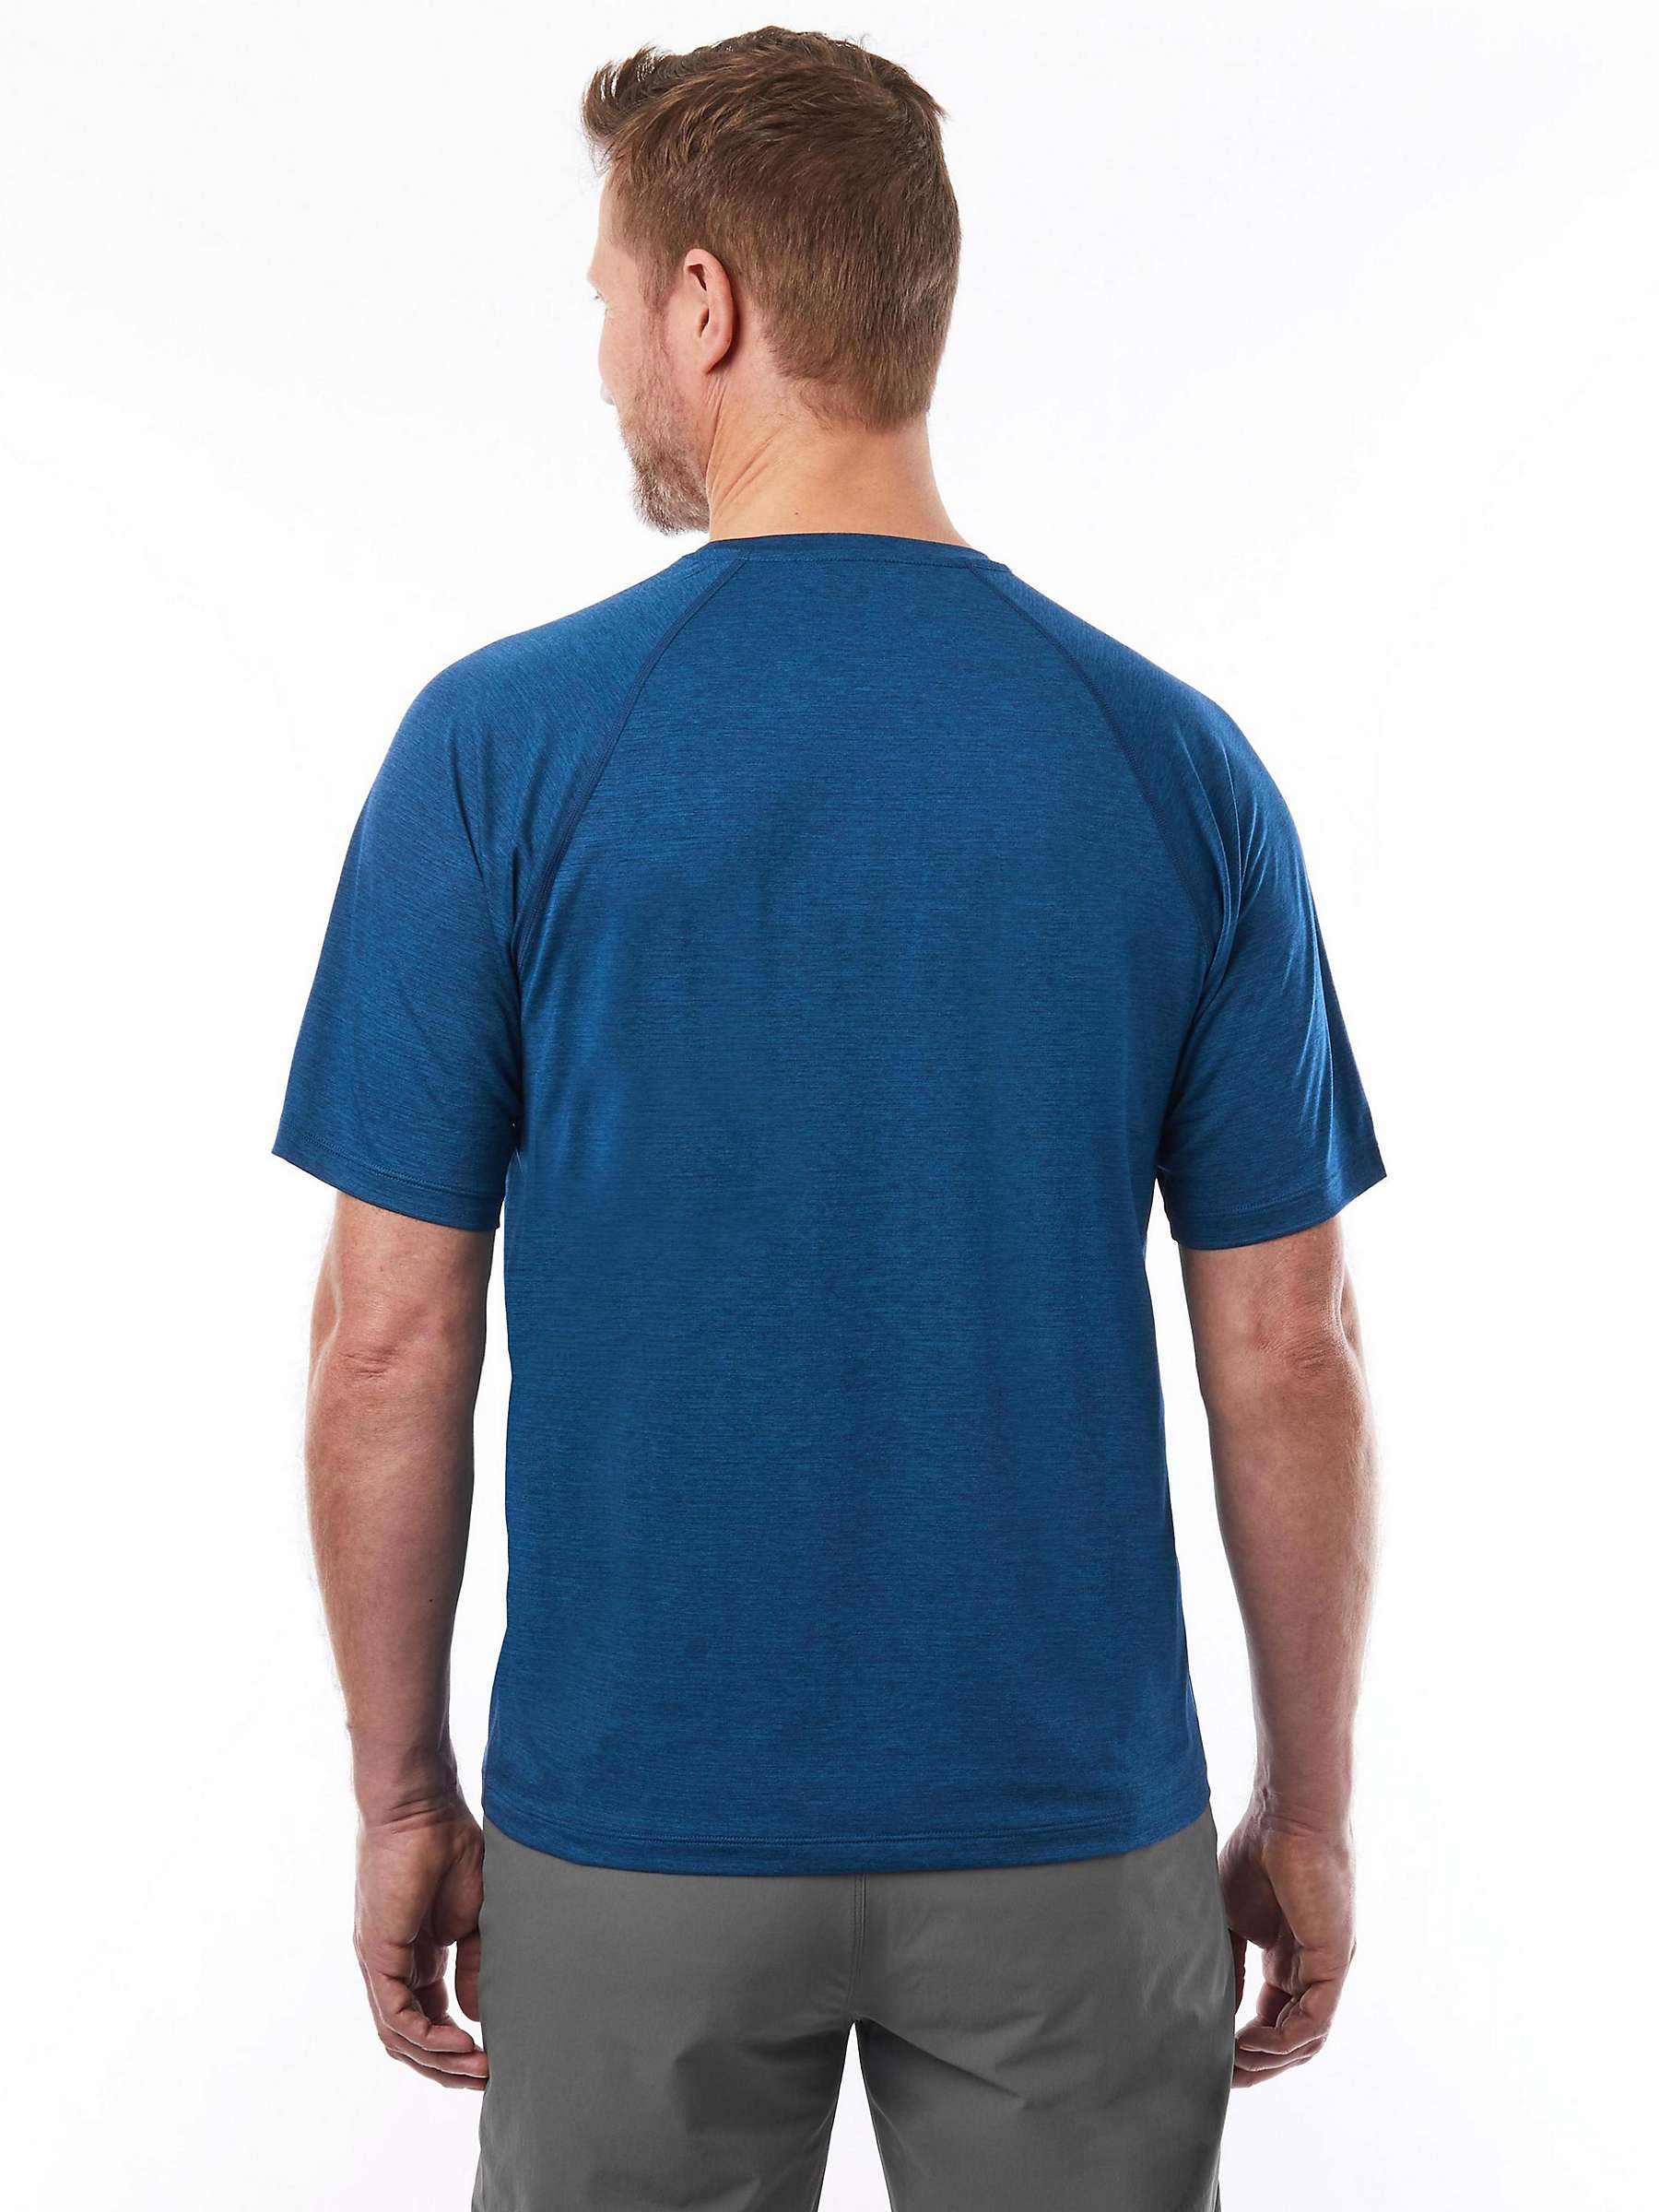 Buy Rohan High Wicking Vapour Short Sleeve T-Shirt, Electric Blue Online at johnlewis.com